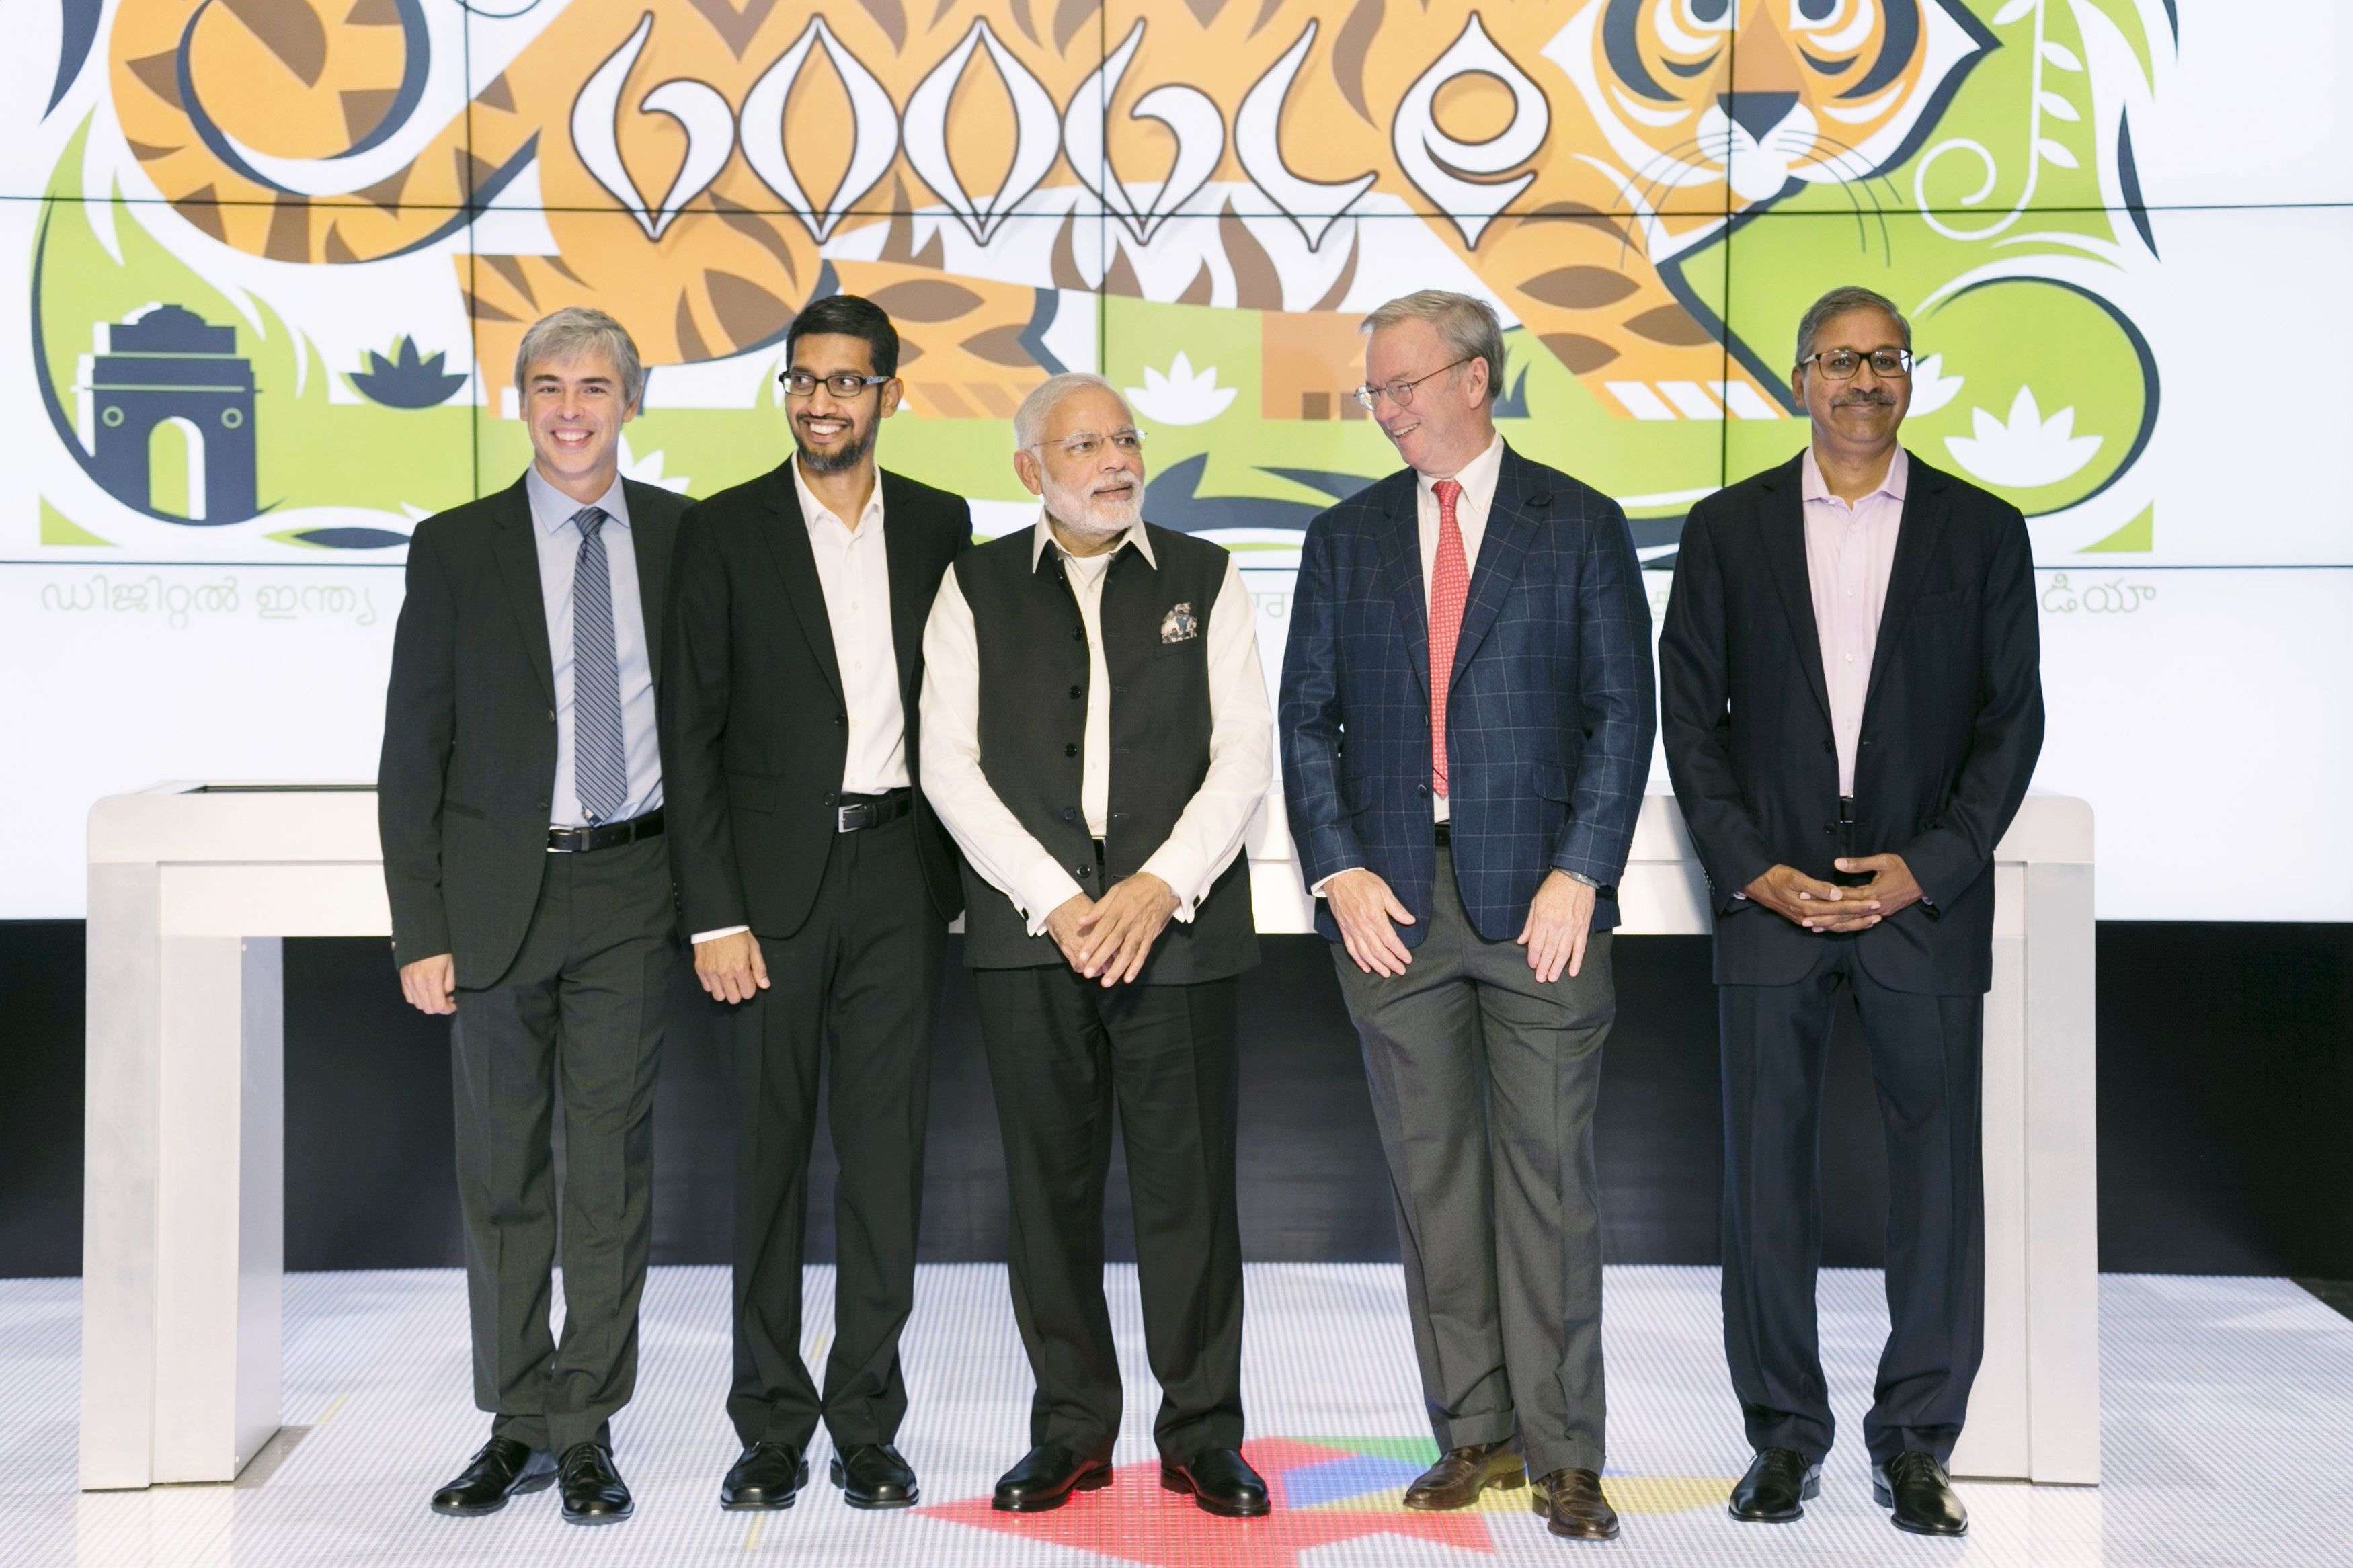 India's Prime Minister Narendra Modi (C) poses for a photo with Google executives Larry Page, Sundar Pichai, Eric Schmidt, and early investor Ram Sriram at the Google campus in Mountain View, California September 27, 2015. REUTERS/Elijah Nouvelage